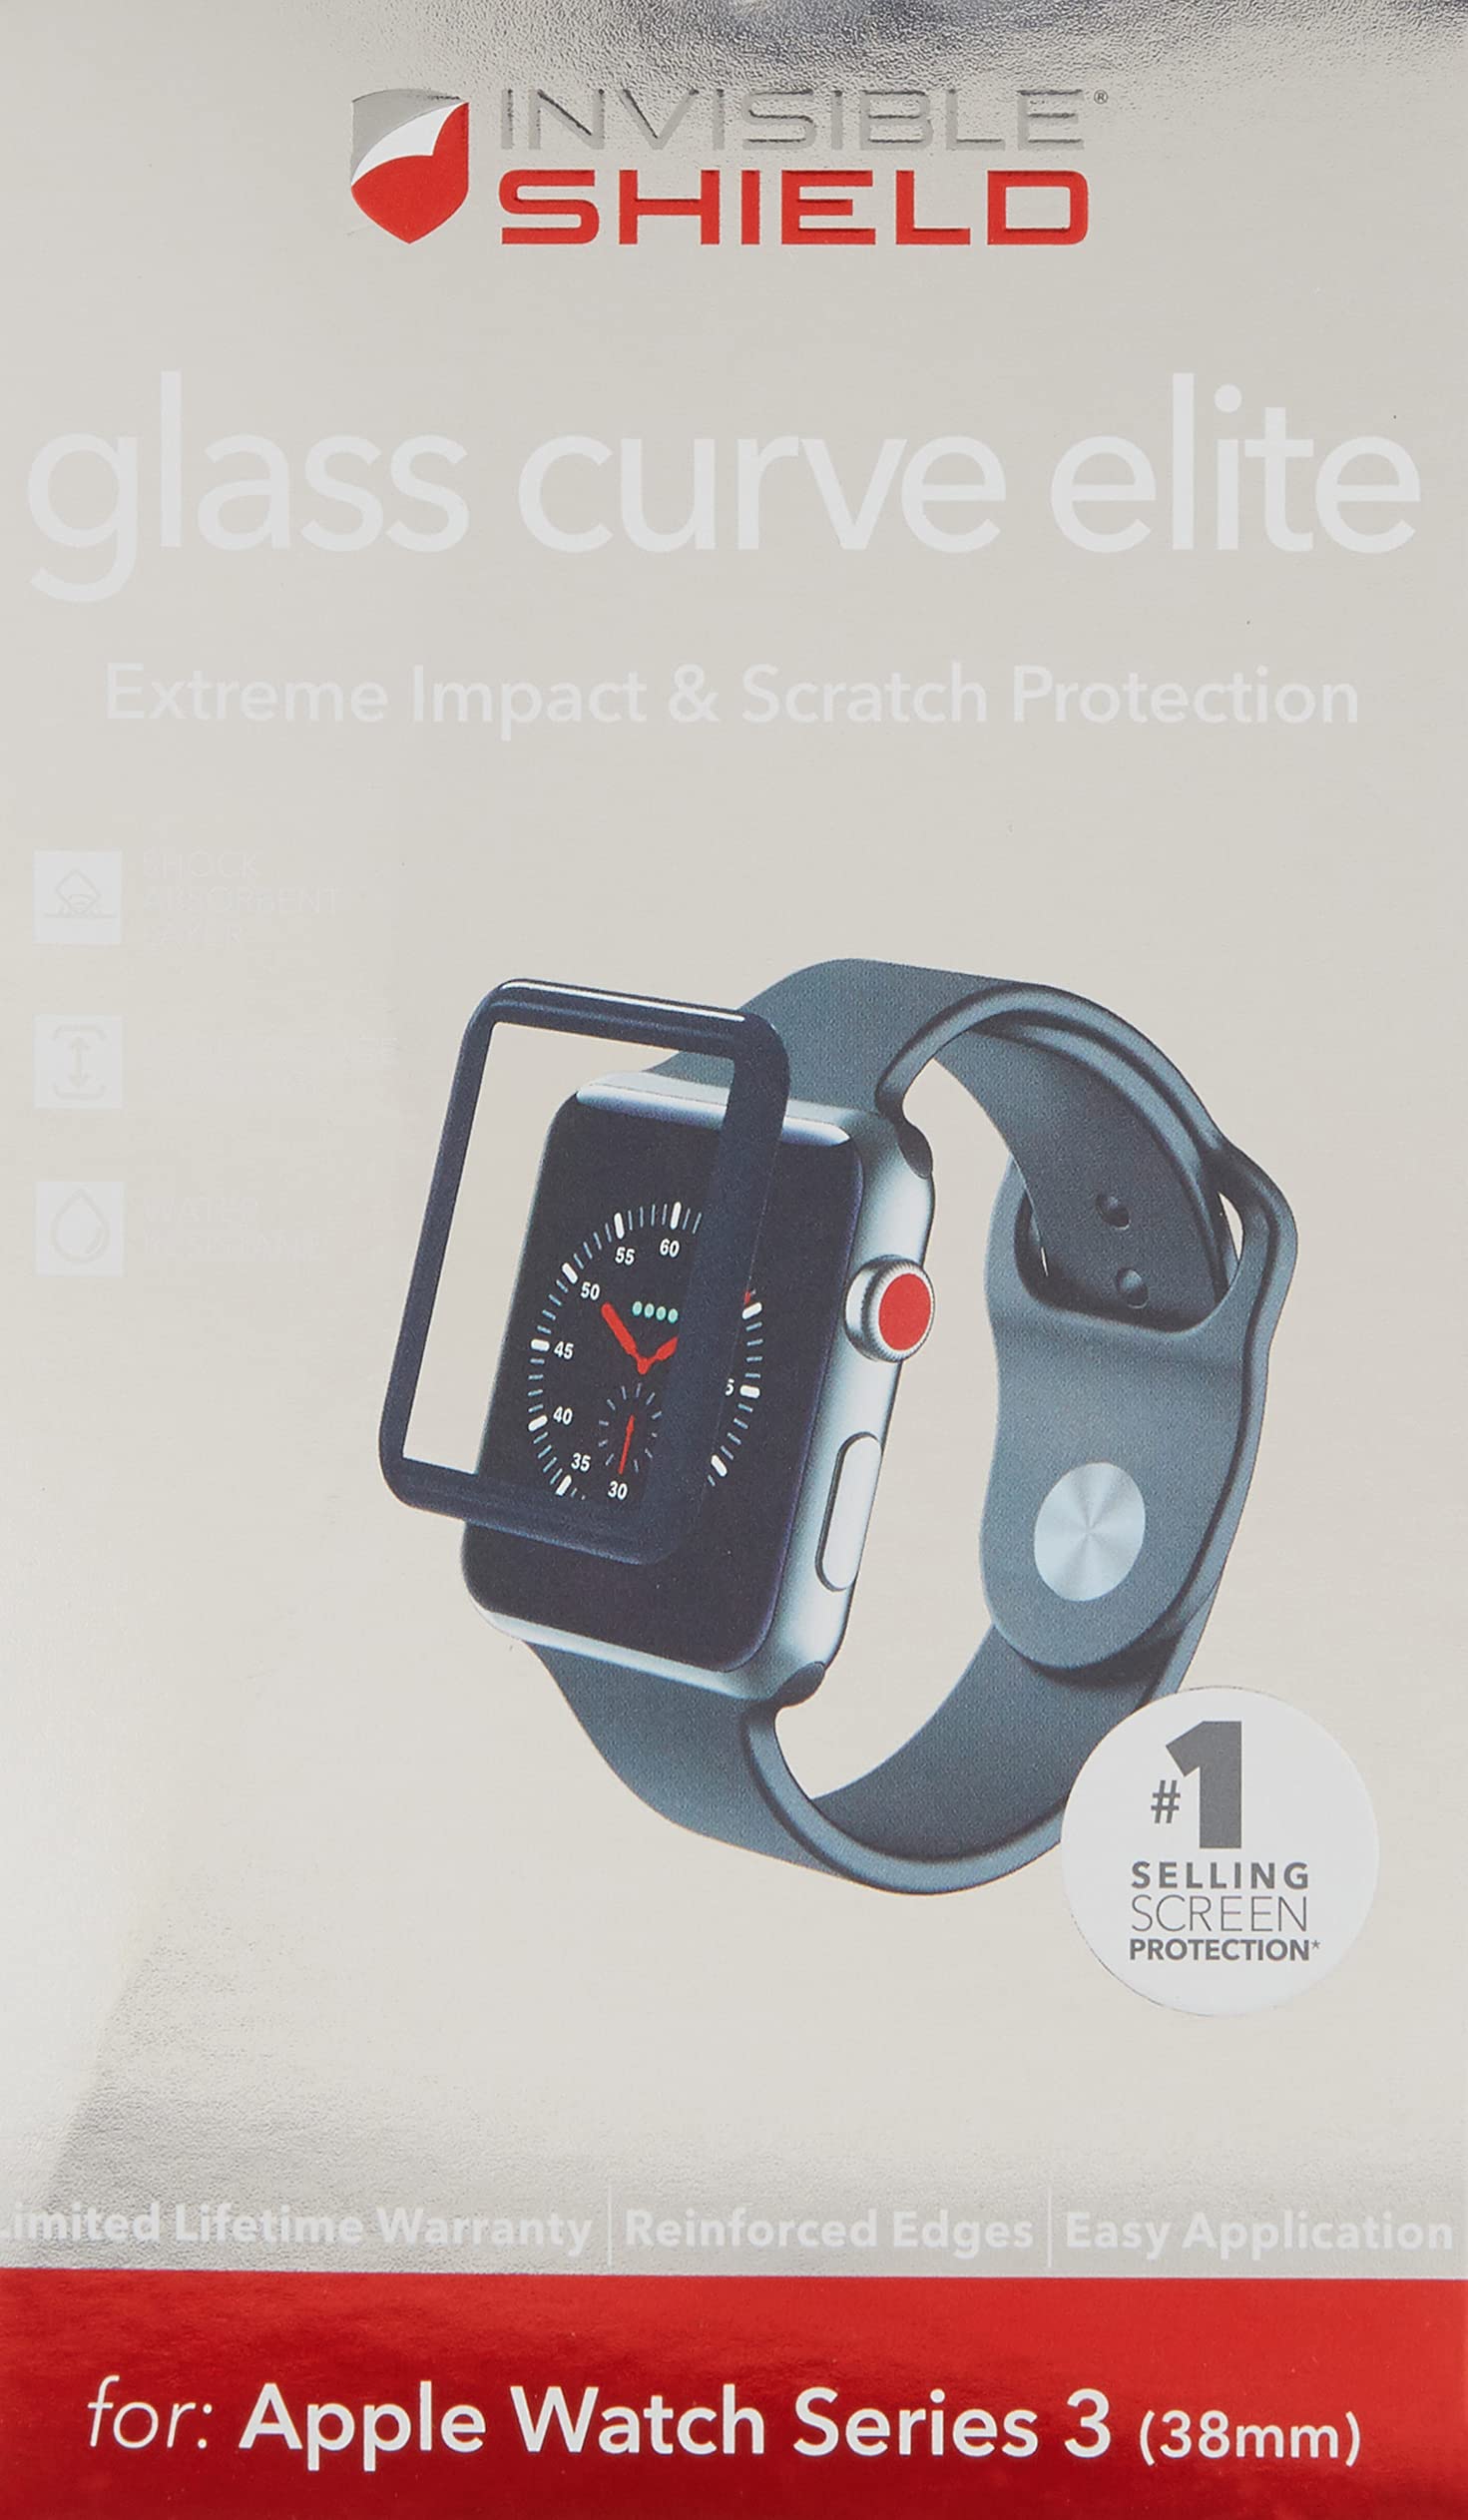 How to Protect Your Apple Watch from Scratches and Other Damage